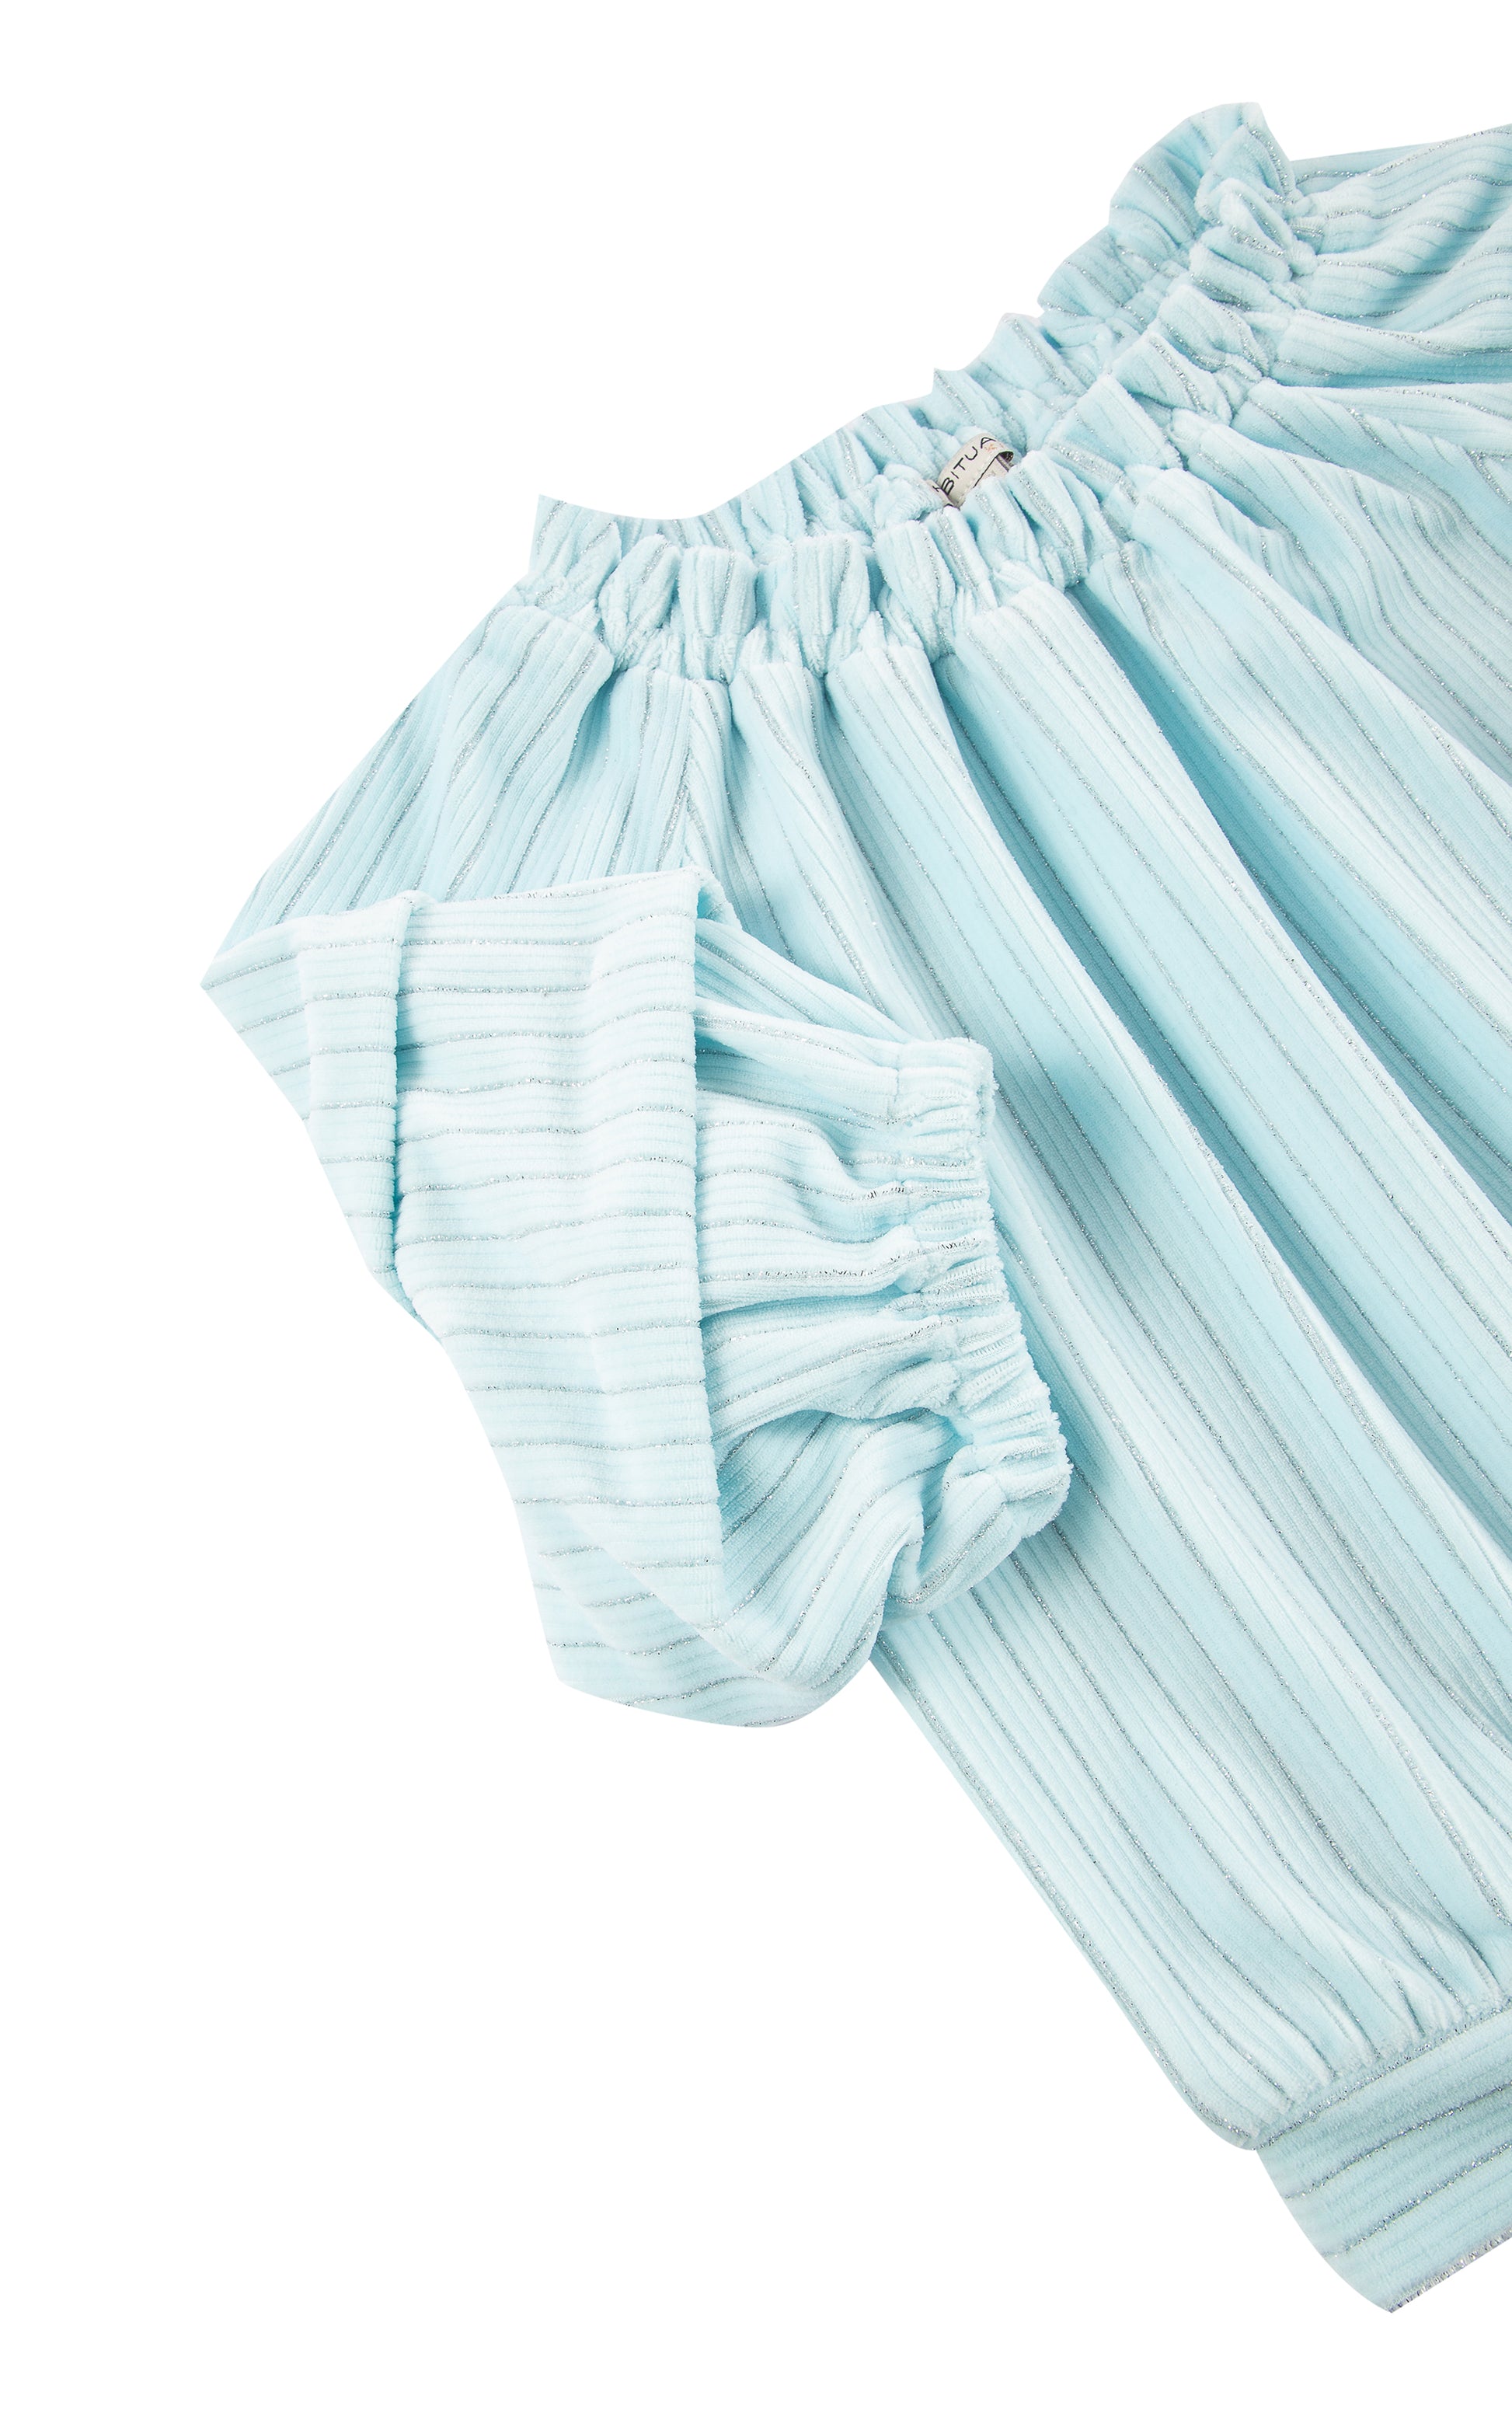 Detail view of blue velour gathered sleeves top with metallic stripes